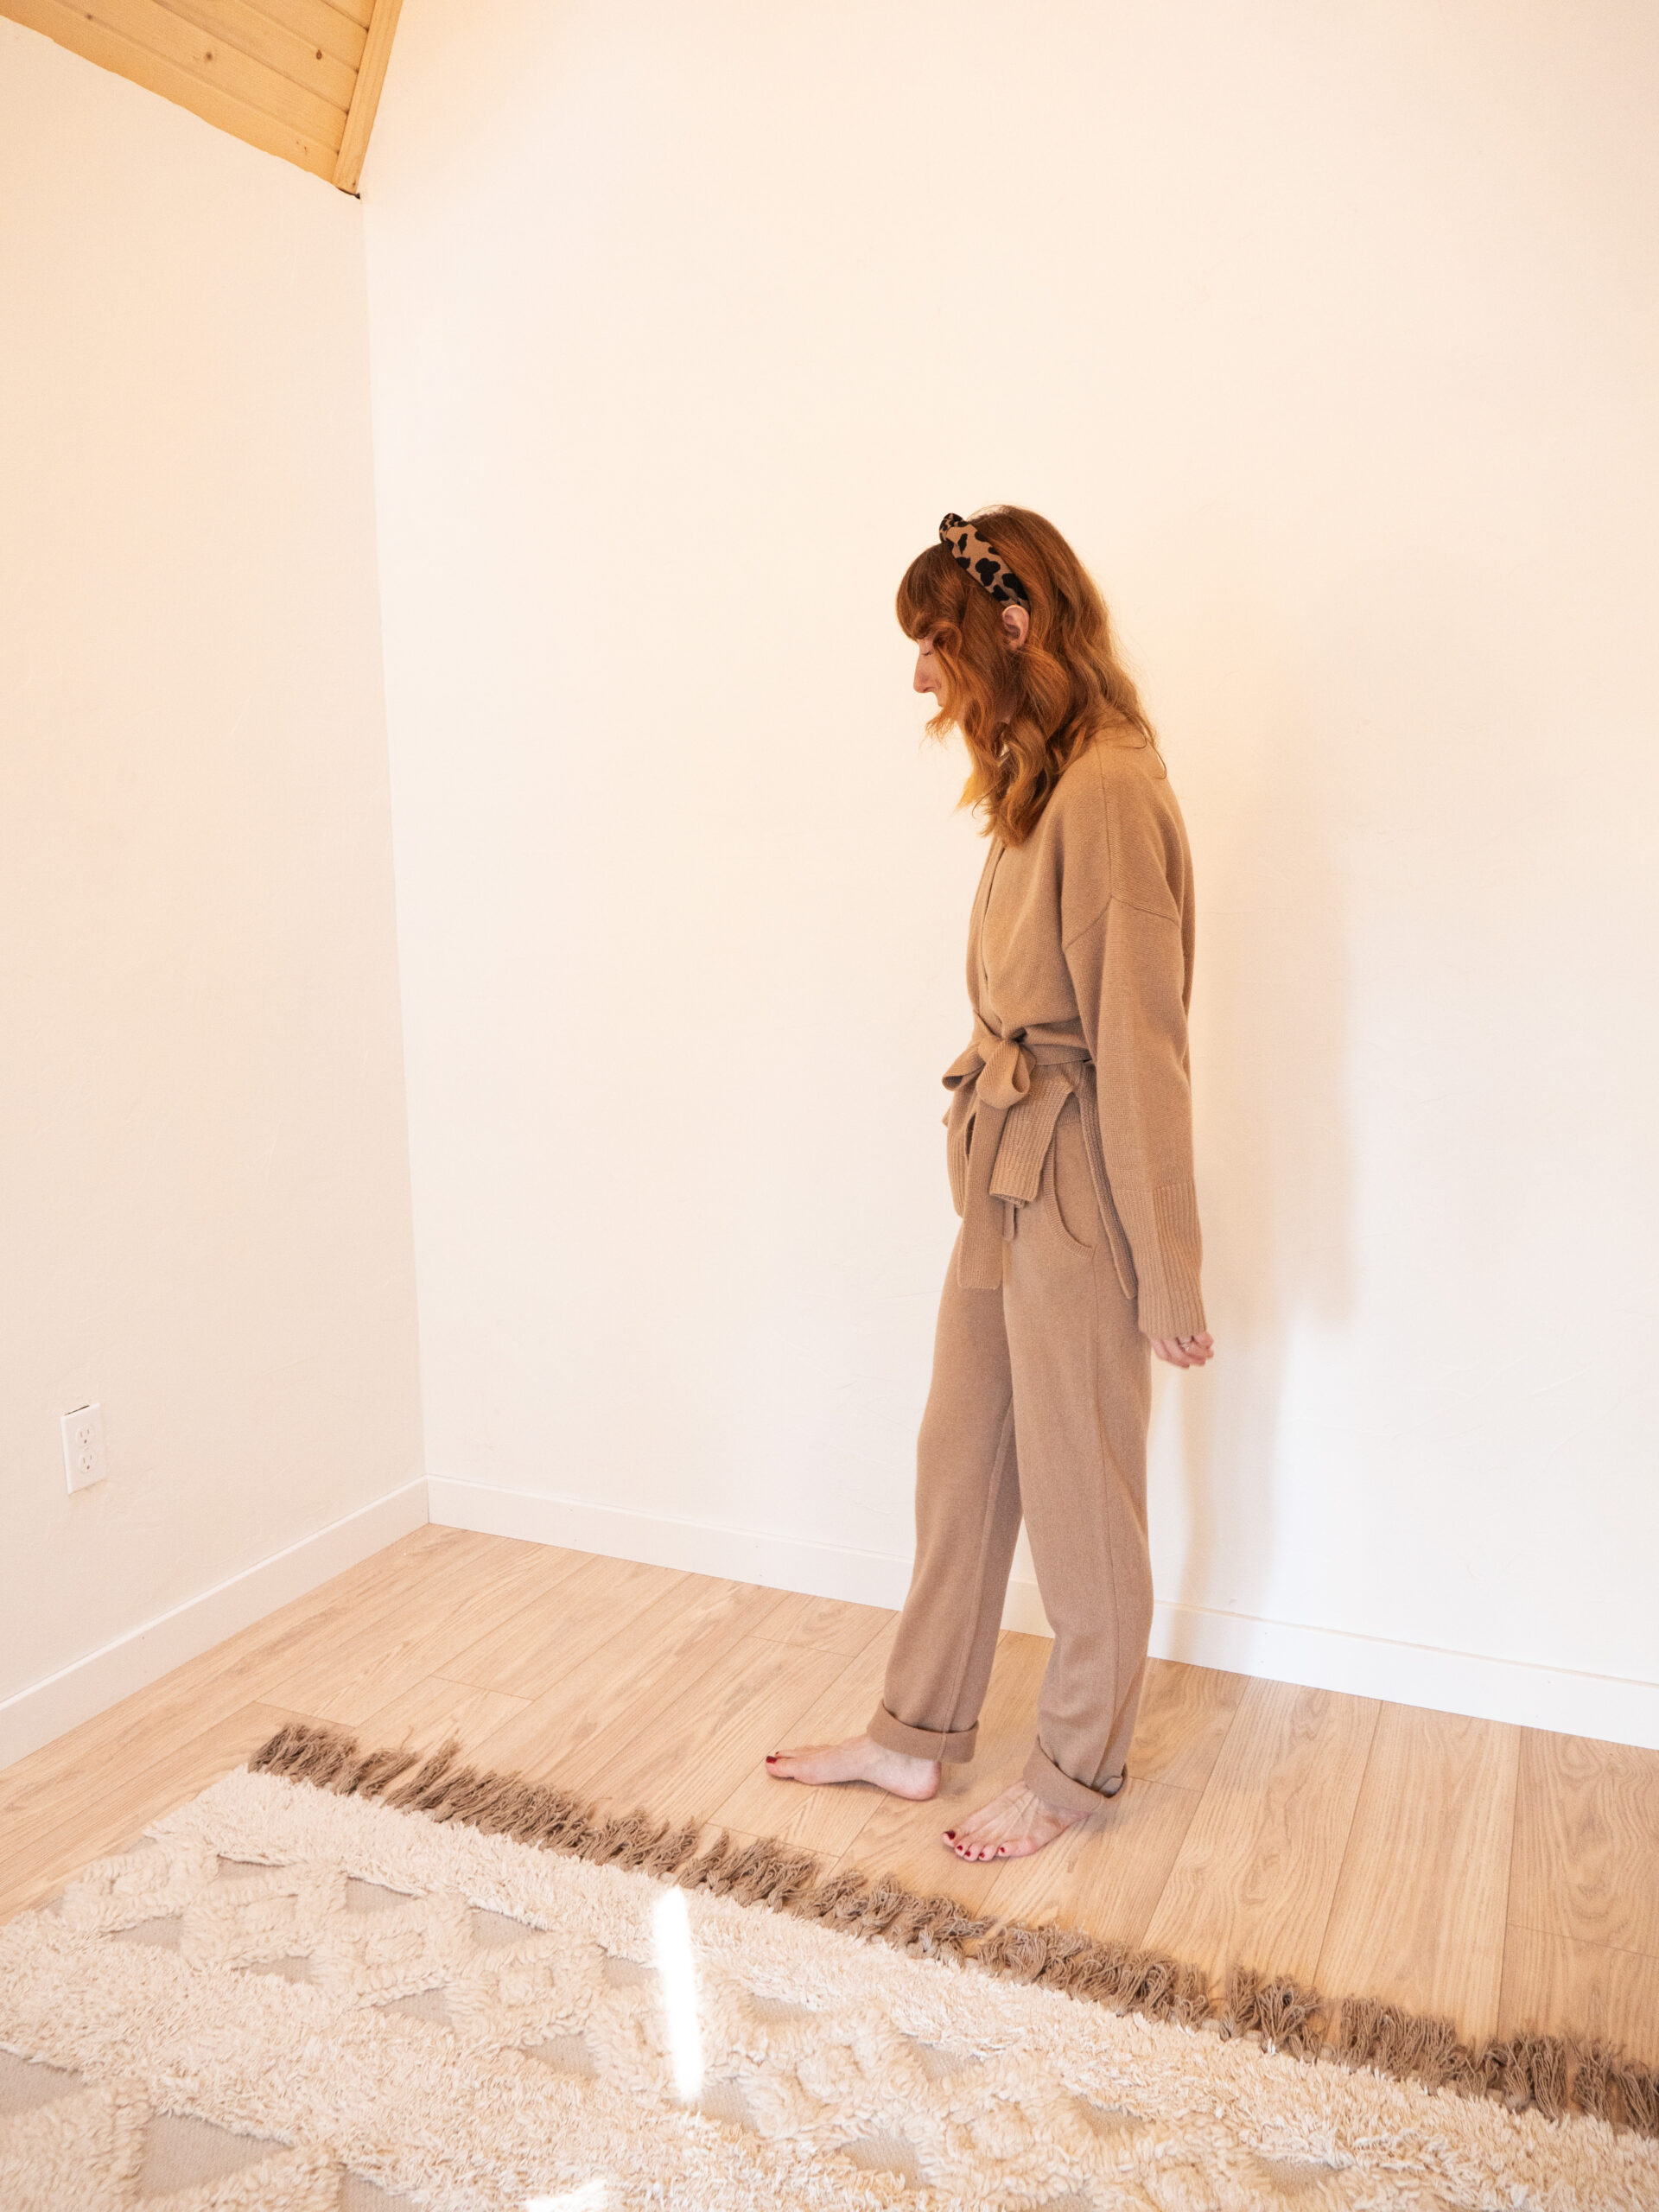 A woman standing in an empty room wearing a tan jumpsuit.